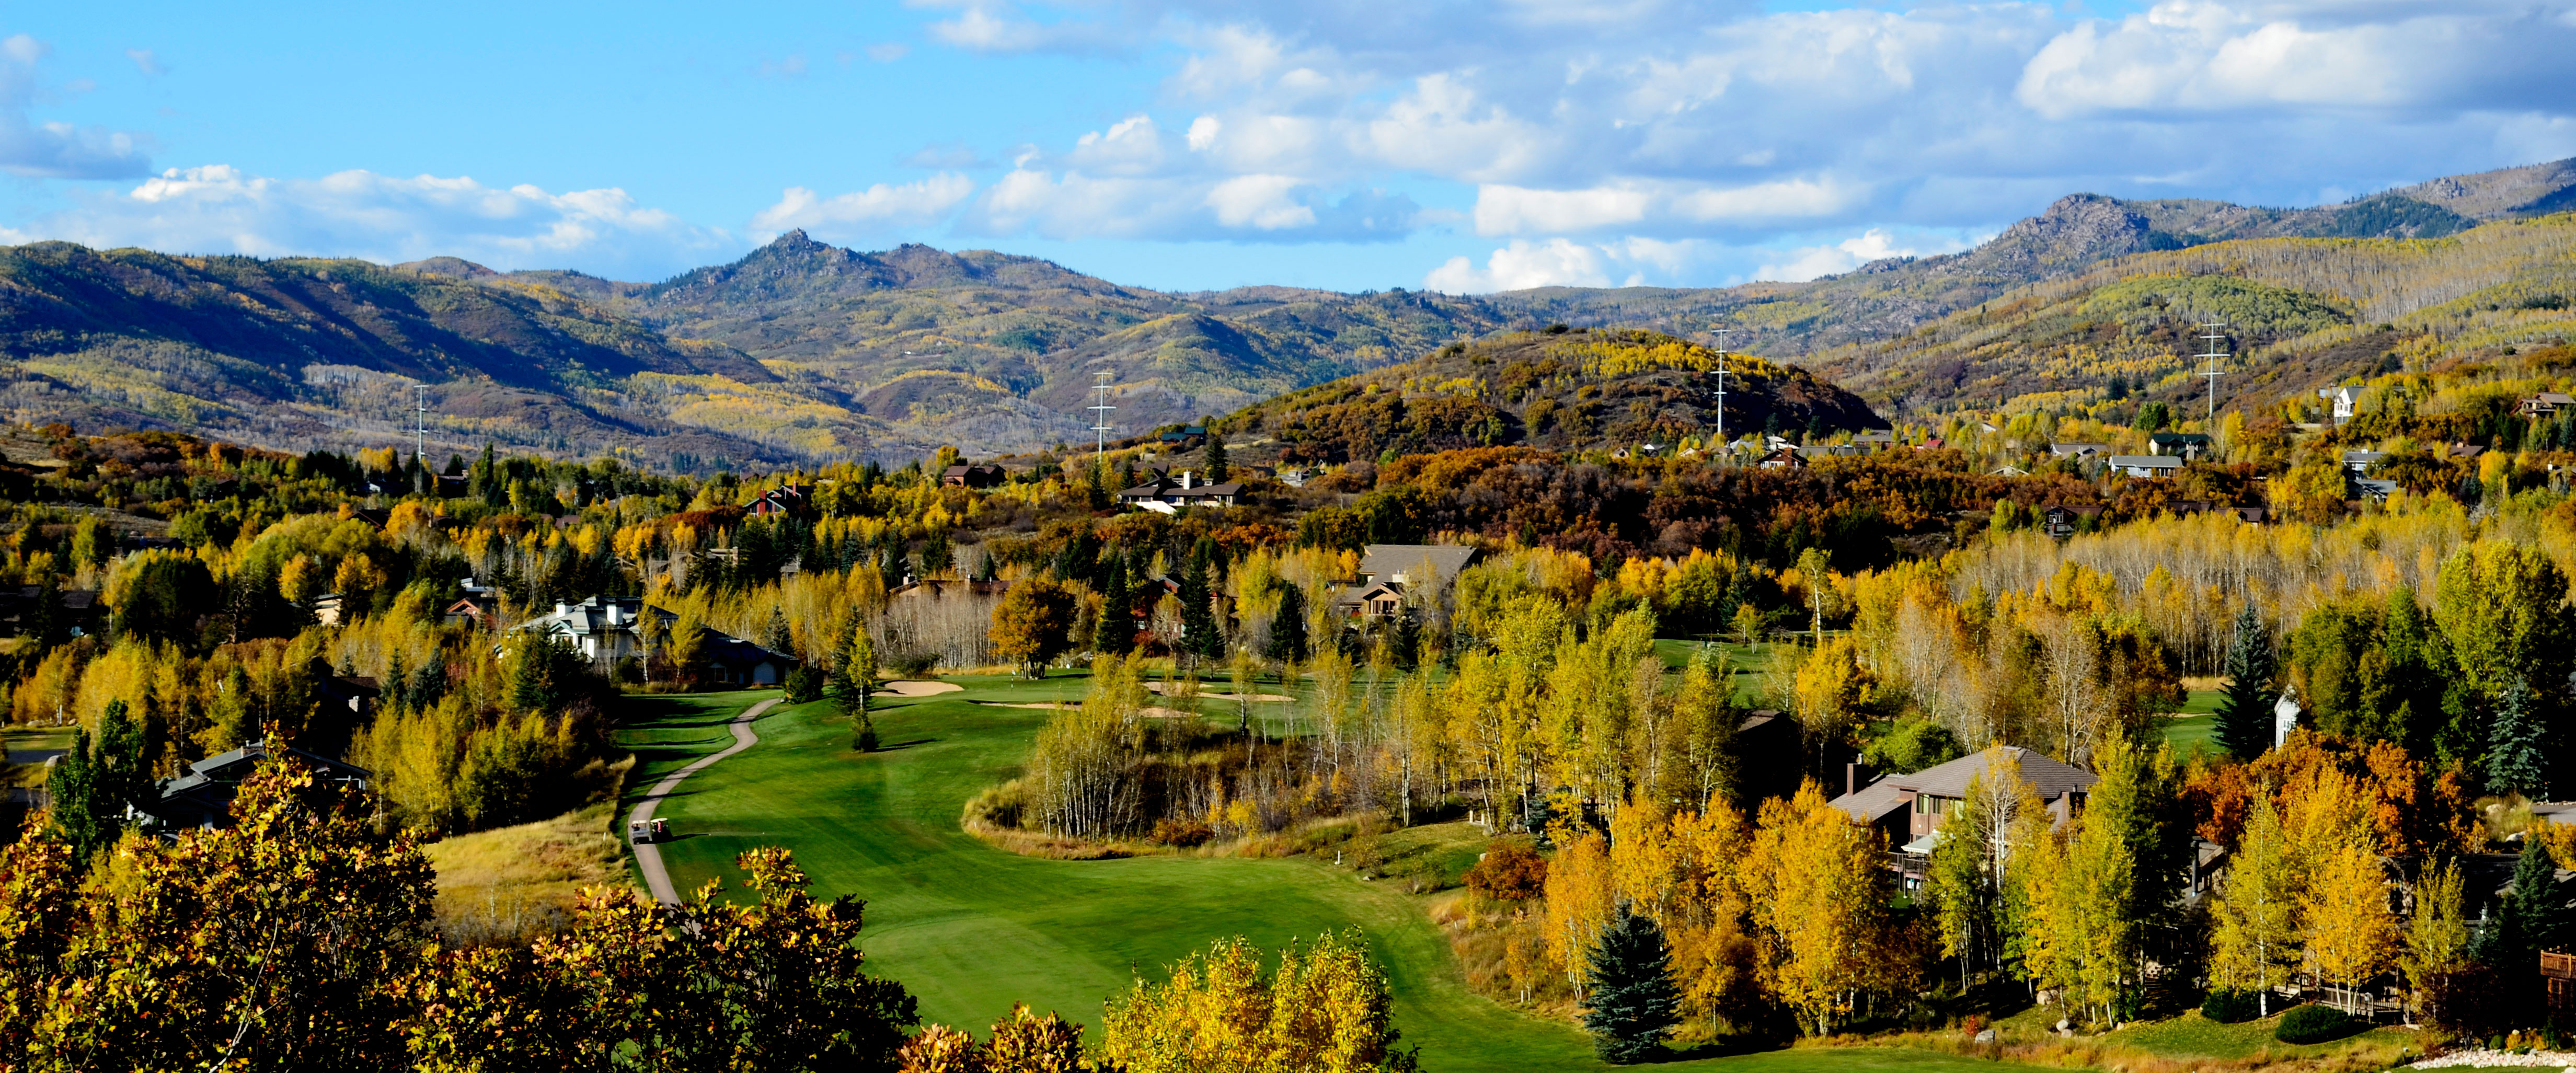 The Rollingstone golf course comes alive with color in the fall